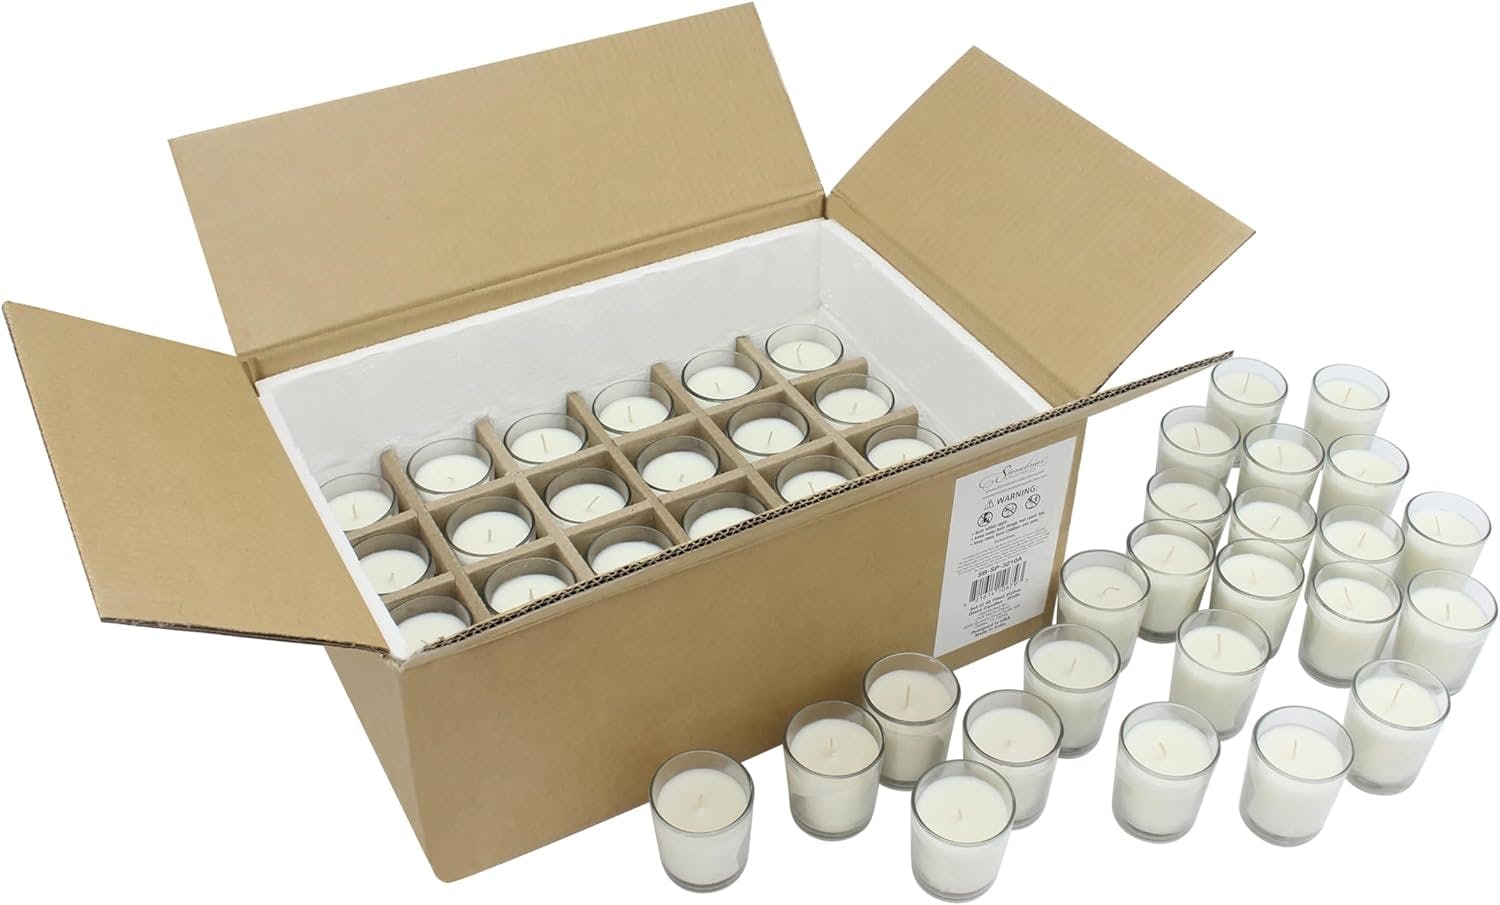 Serenity White Scented Flameless Votive Candles, 48-Pack